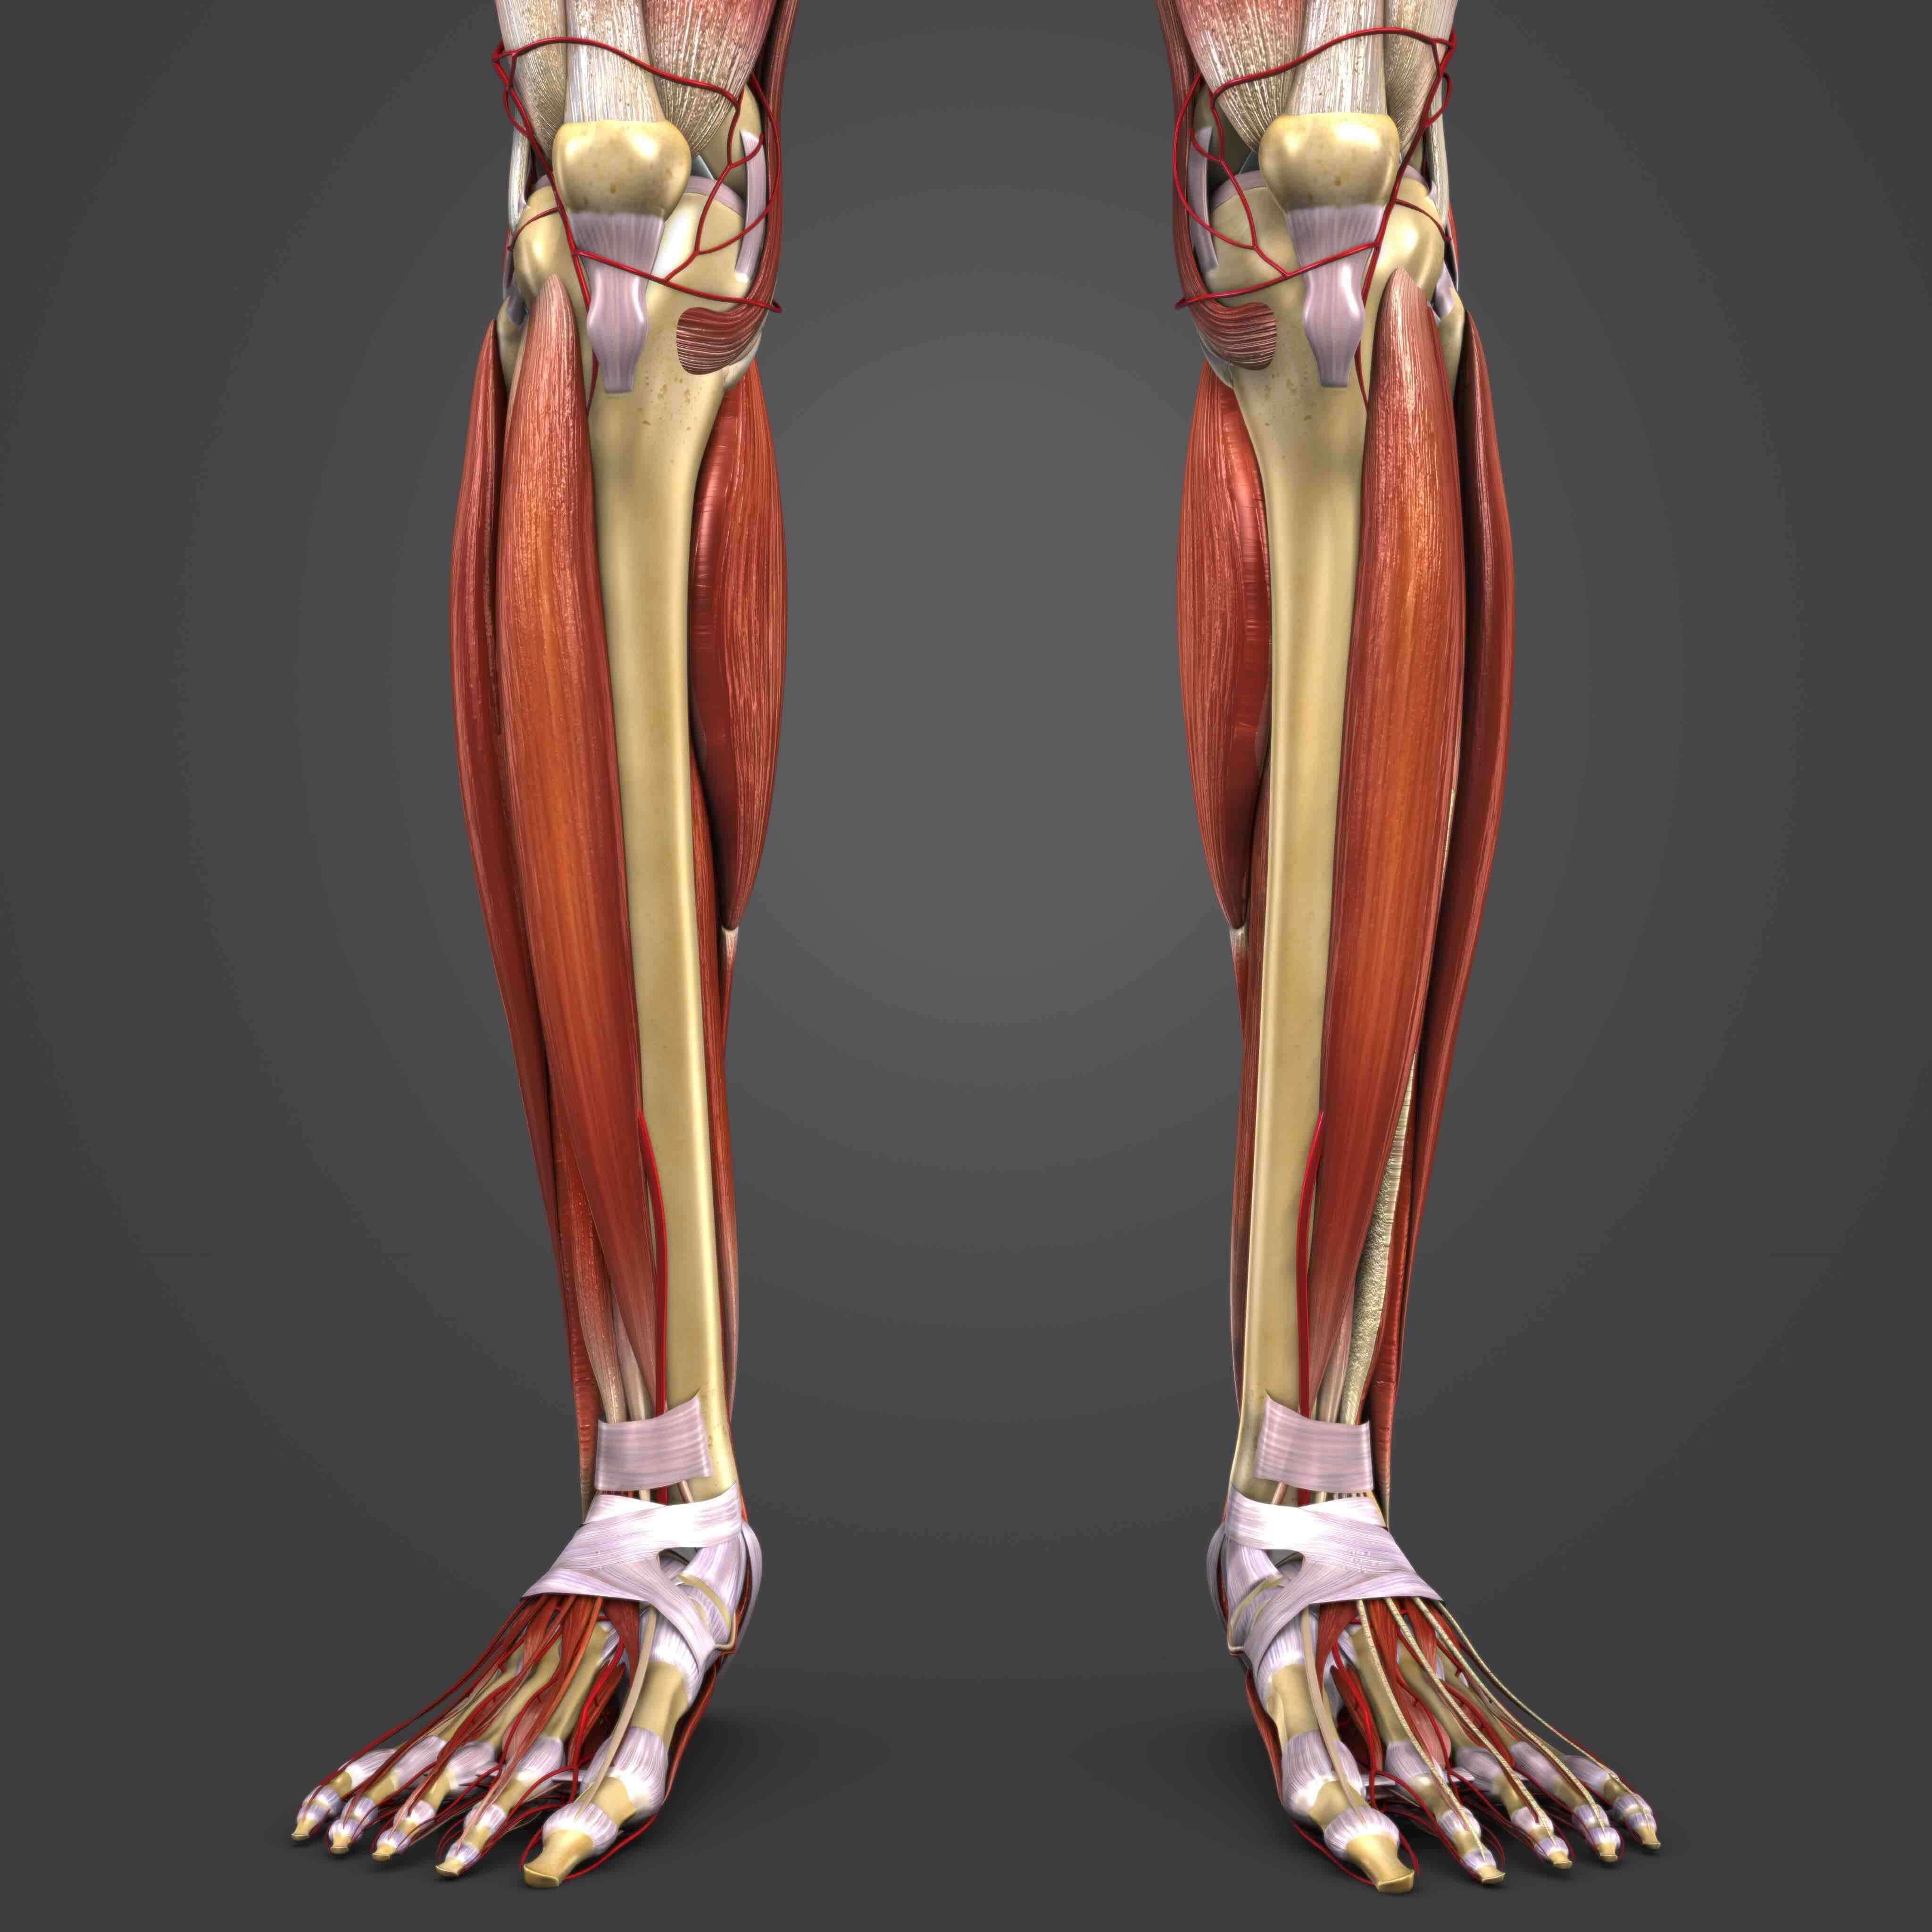 Iliotibial Band Syndrome - What You Need to Know